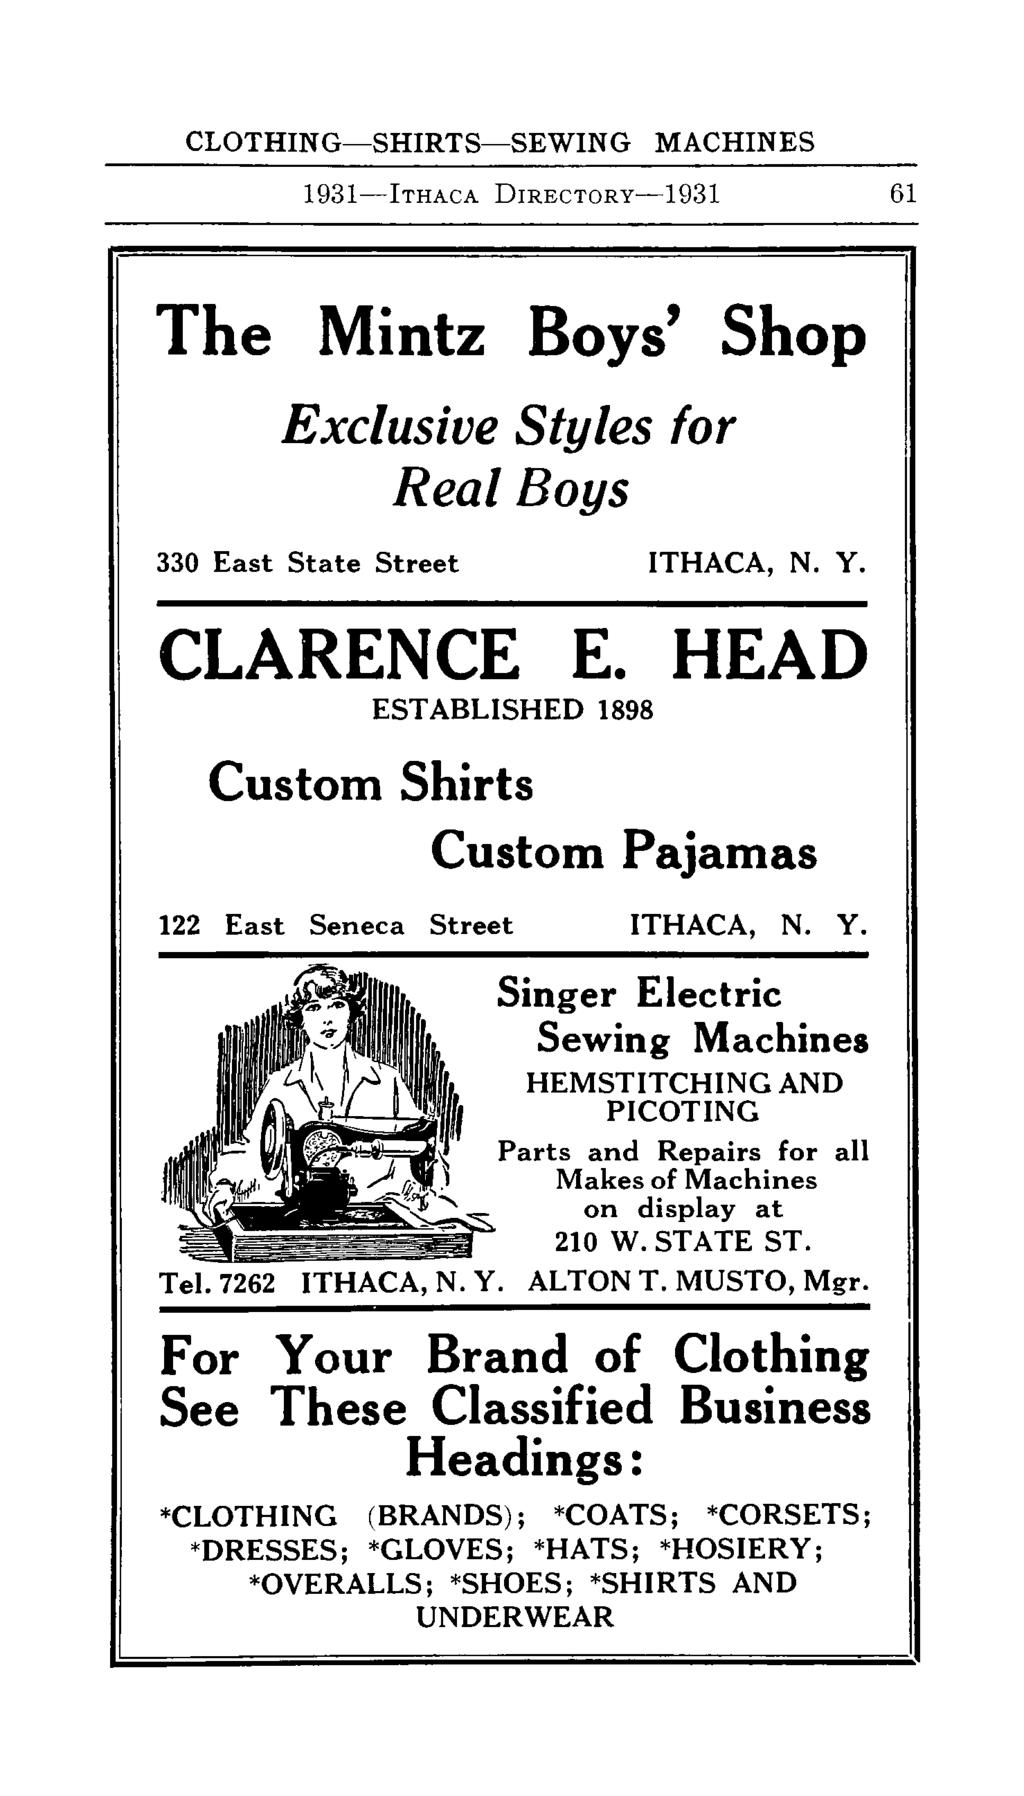 CLOTHING-SHIRTS-SEWING MACHINES 1931-lTHAcA DJRECTORy-1931 61 The Mintz Boys' Shop Exclusive Styles for Real Boys 330 East State Street ITHACA, N. Y. CLARENCE E.